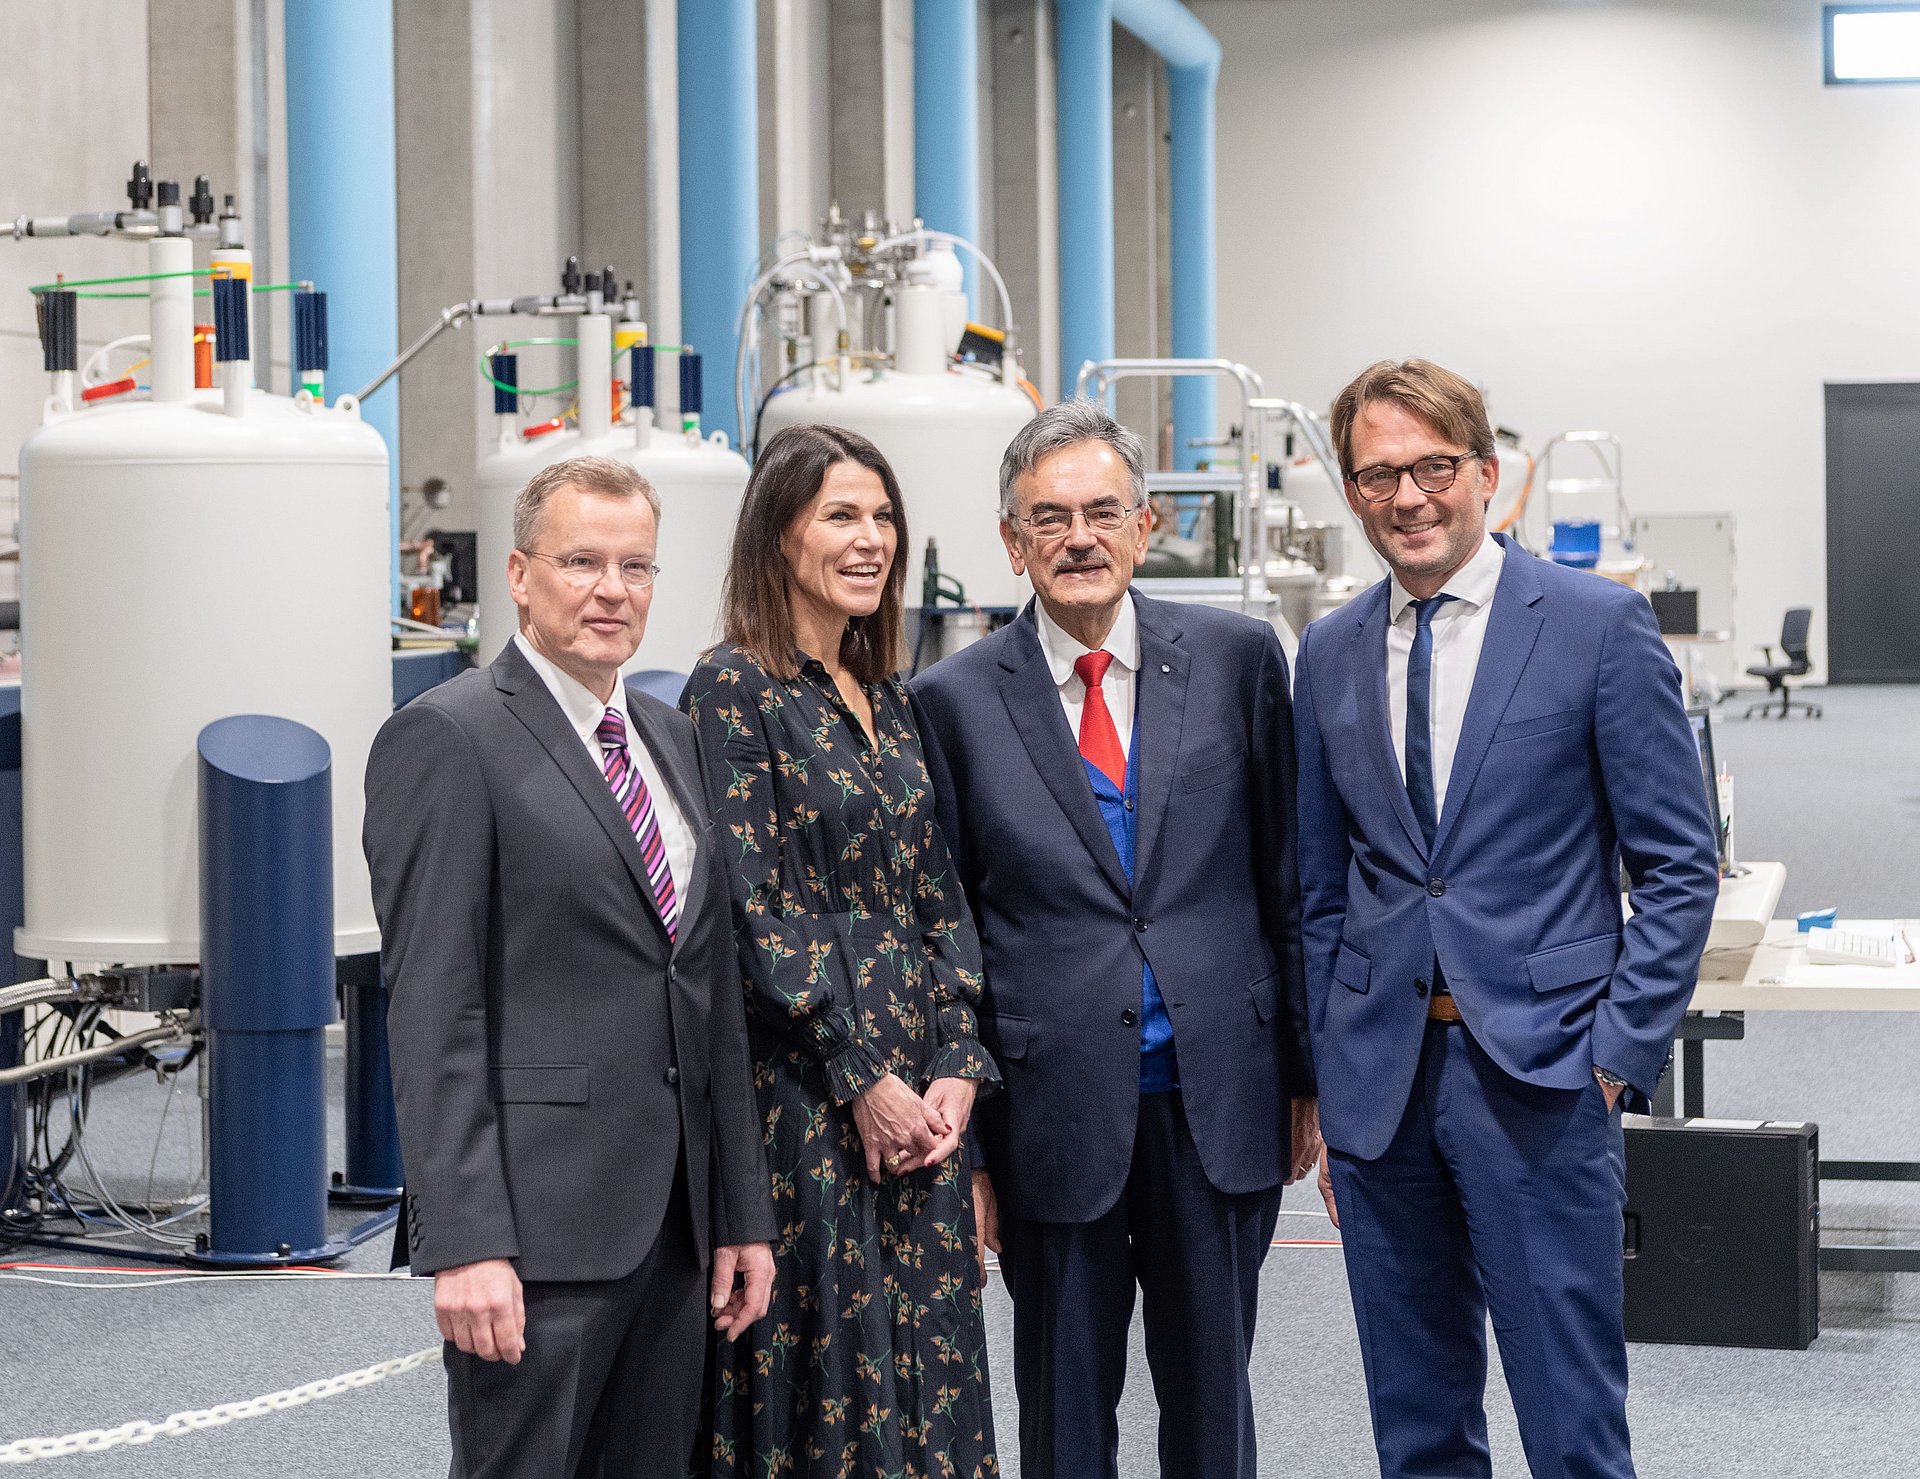 Prof. Michael Sattler, Prof. Marion Kiechle , Prof. Wolfgang A. Herrmann and Prof. Matthias Tschöp (from left) at the opening of the new building of the Bavarian NMR Centre. (Picture: A. Heddergott)